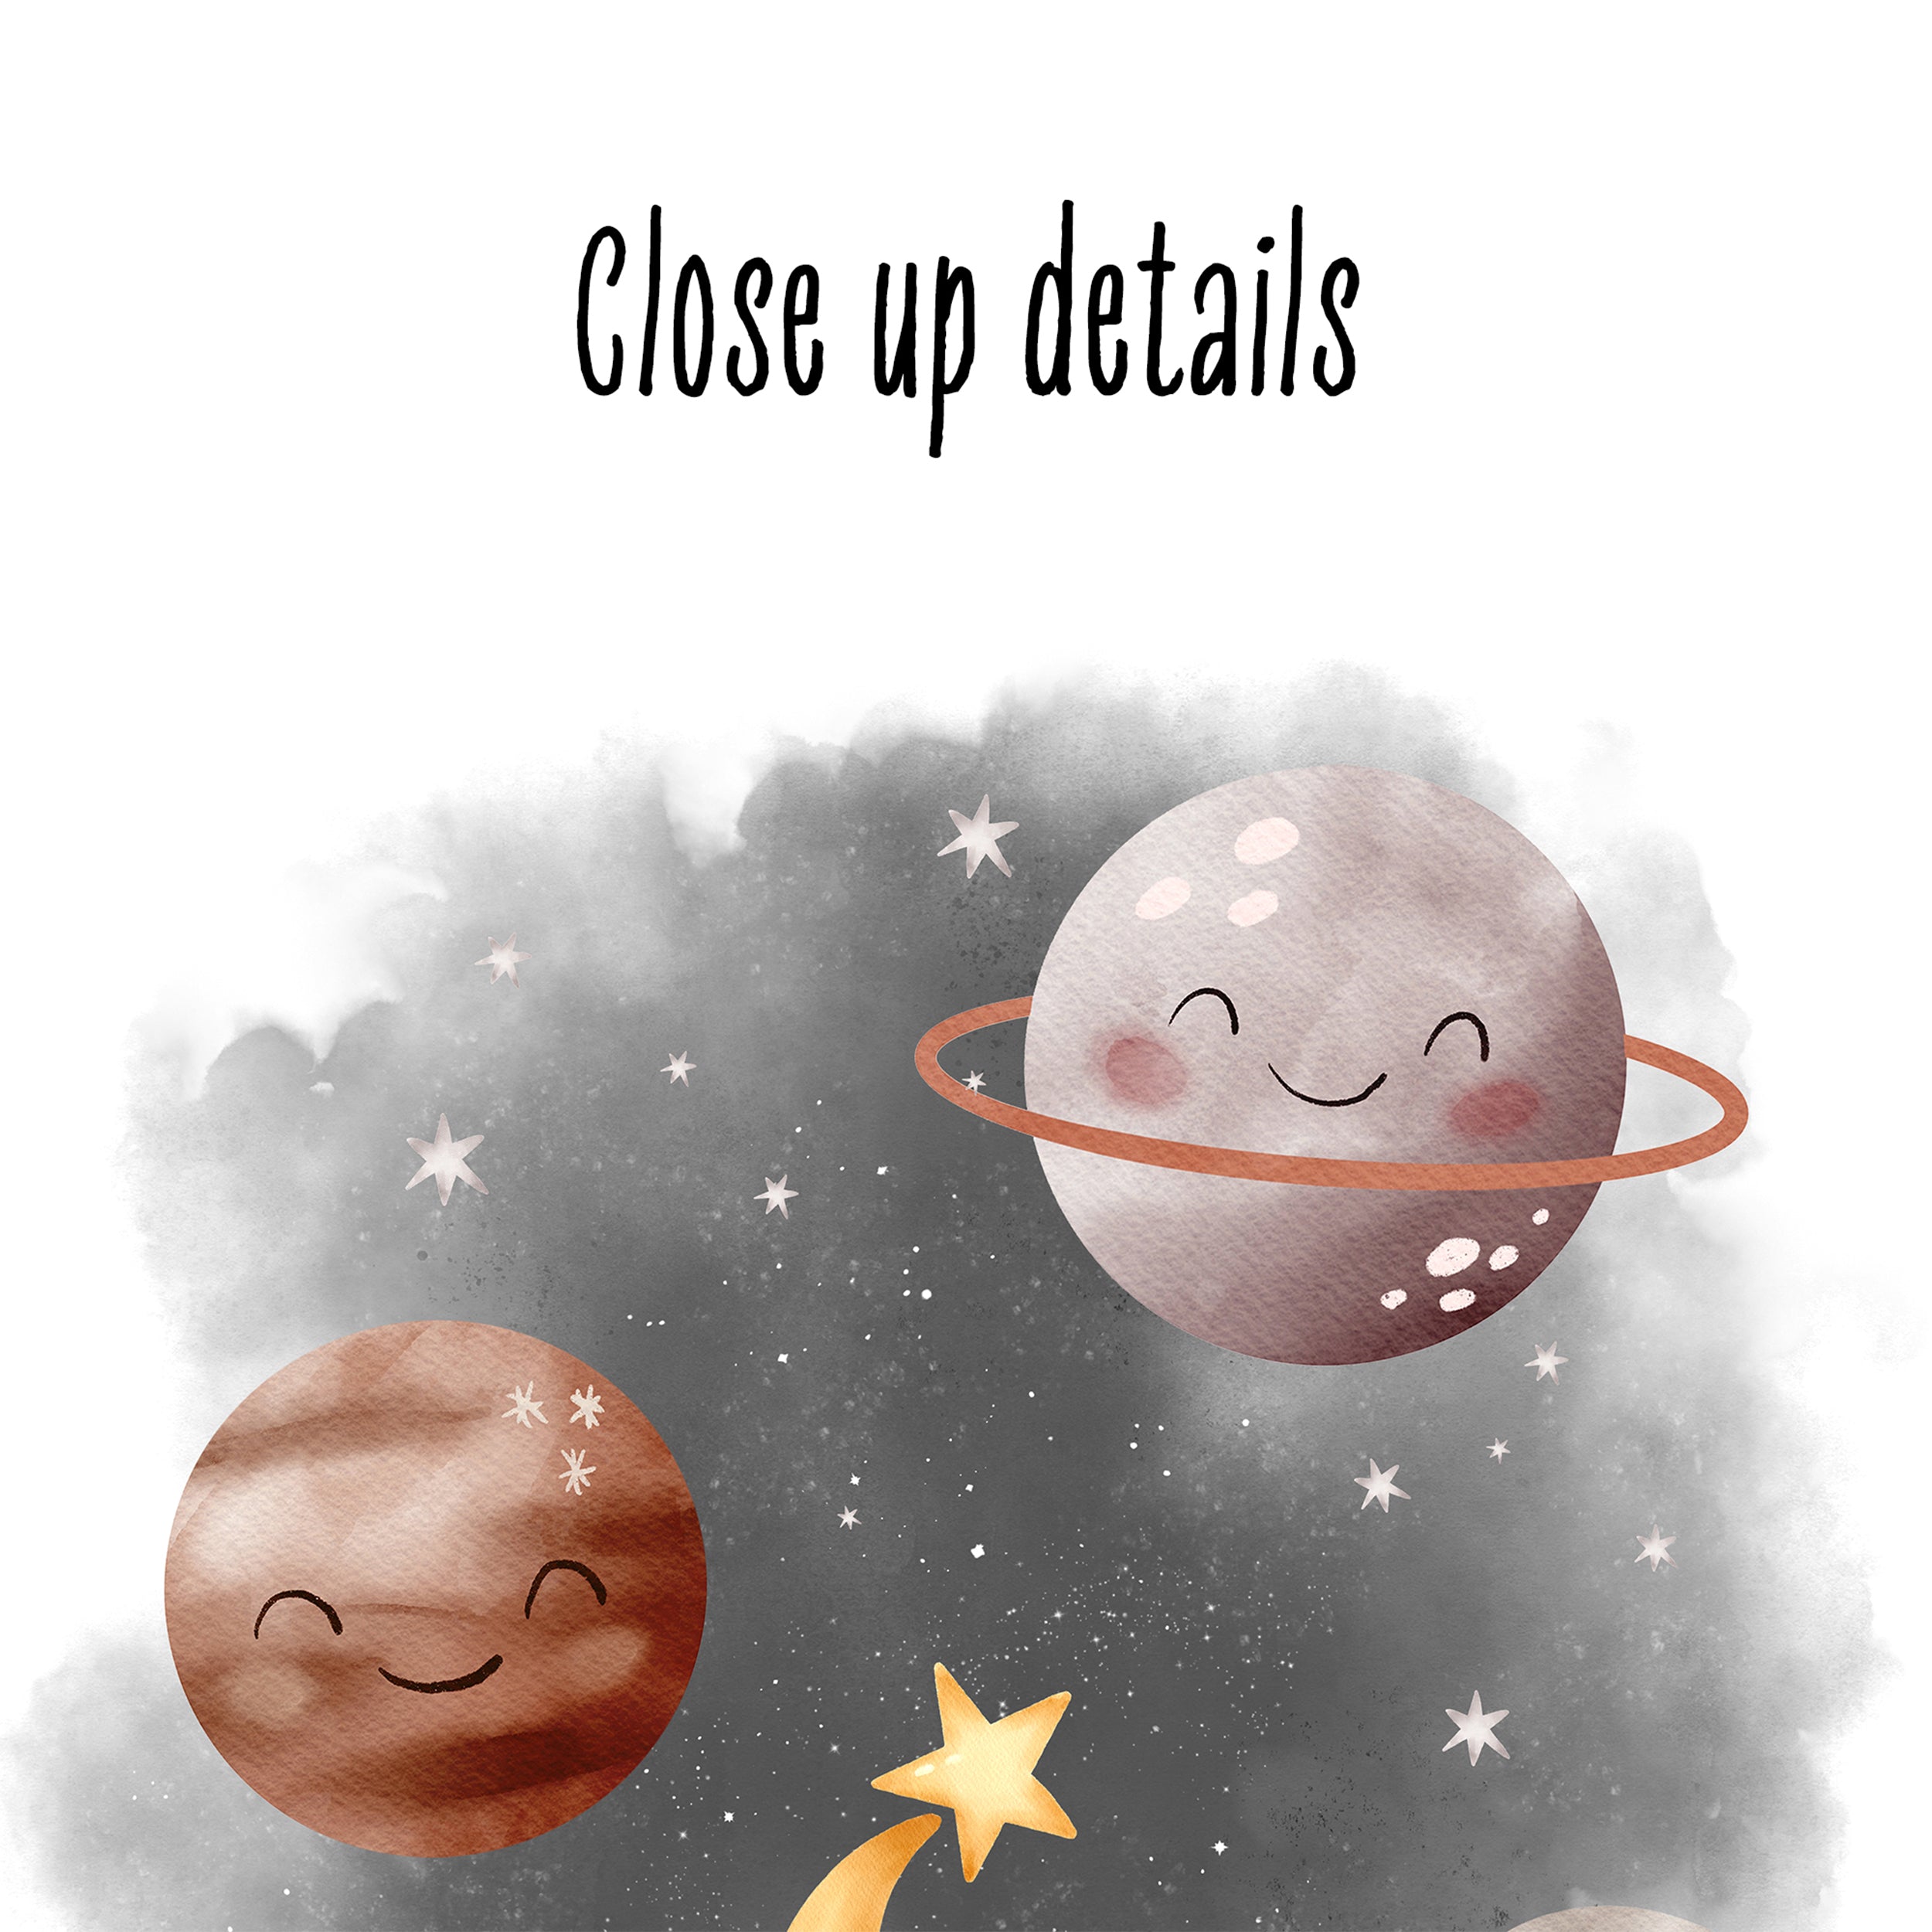 Planets and Space, Little Explorer Nursery Wall Art